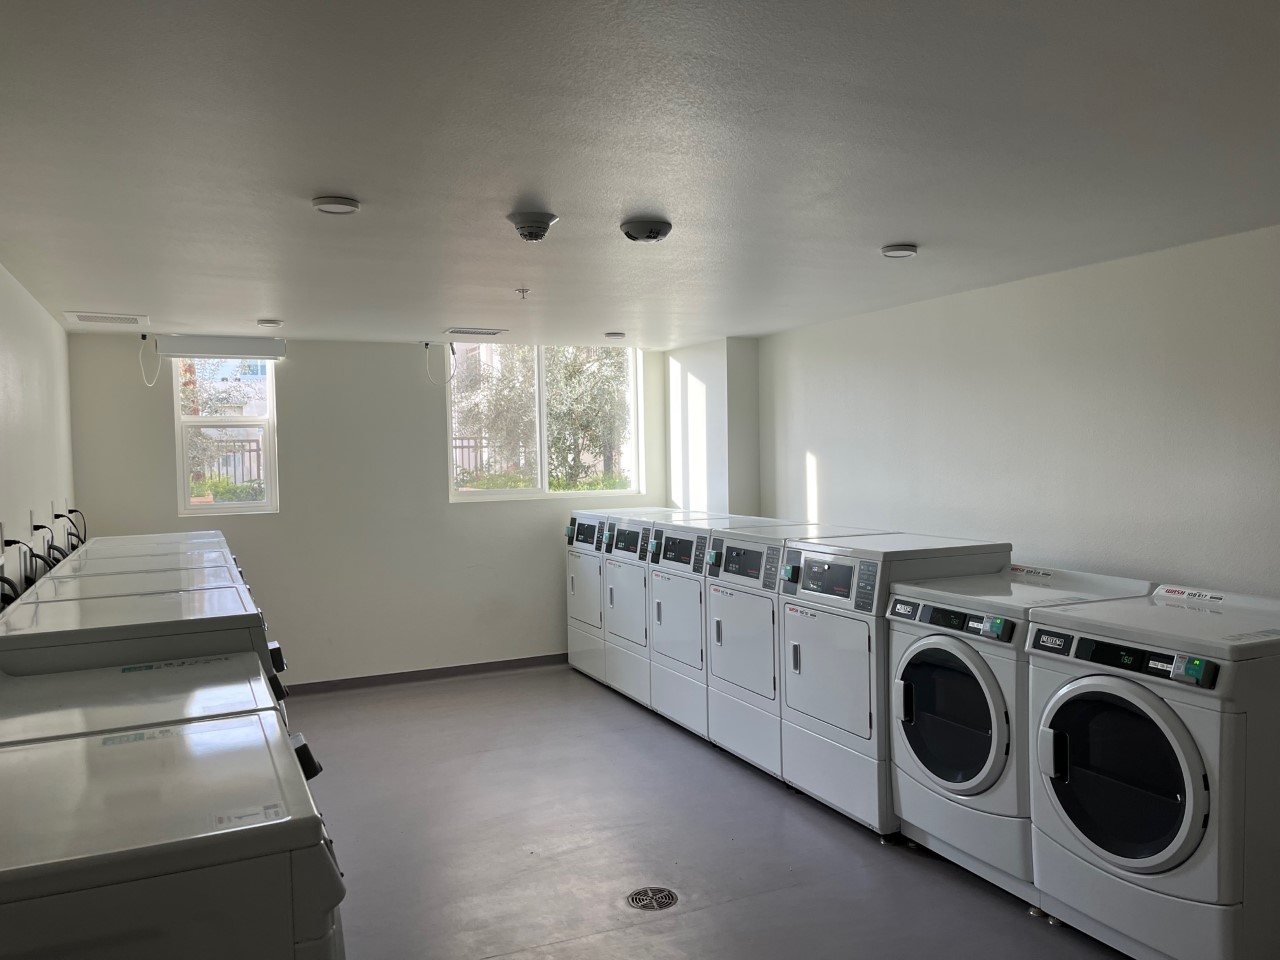 Laundry room with two rows of machines facing each other. On the far wall there are two windows with a view of the courtyard.